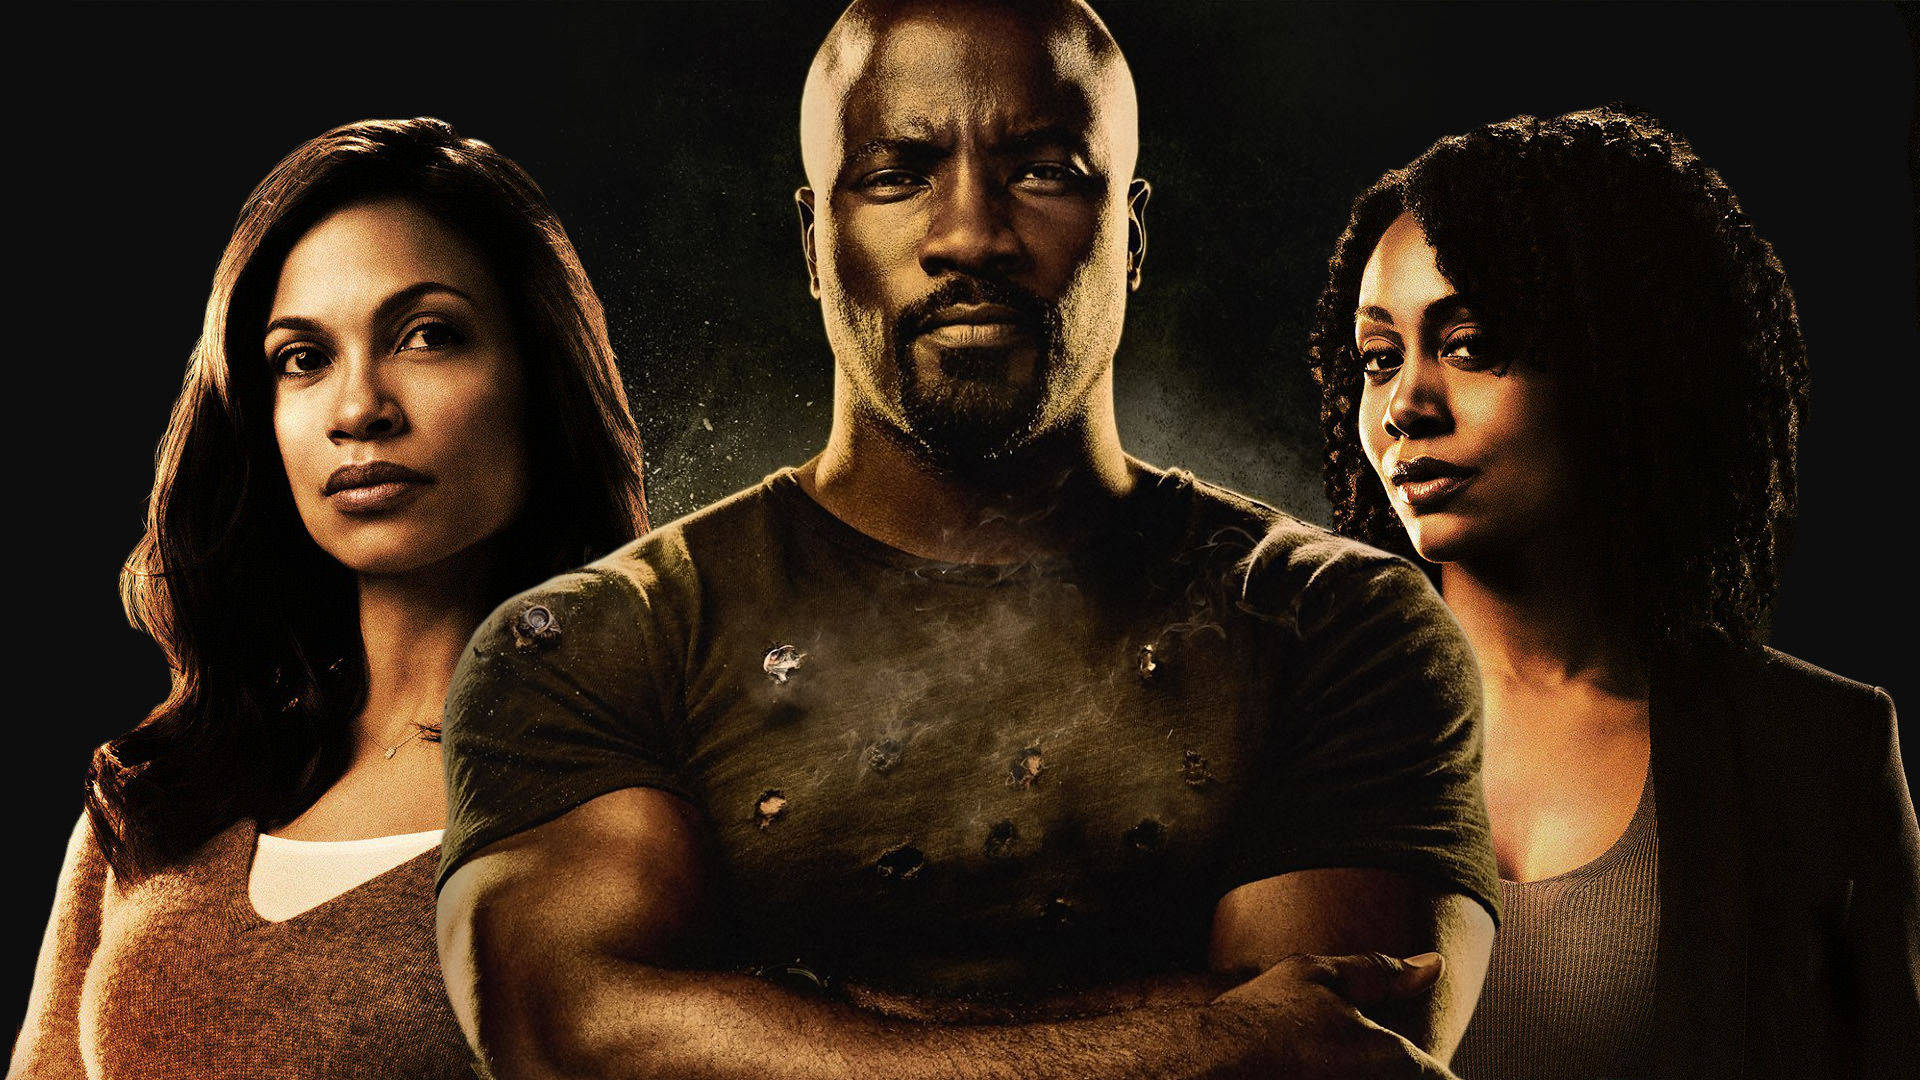 Pretty Promotional Portraits Of Luke Cage Wallpaper